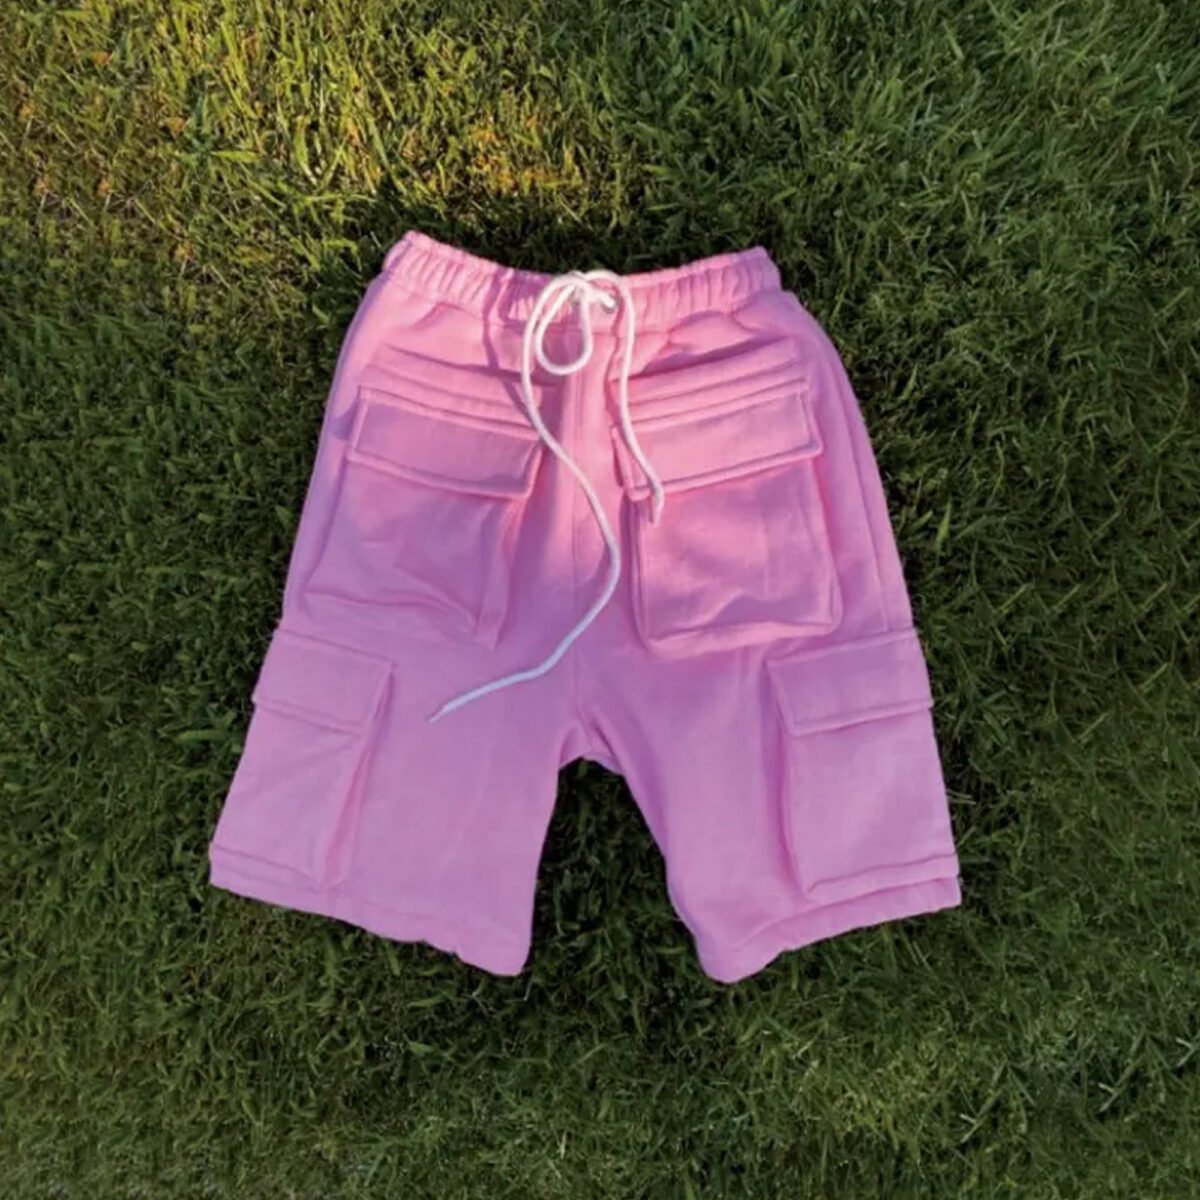 Thick fabric high quality shorts